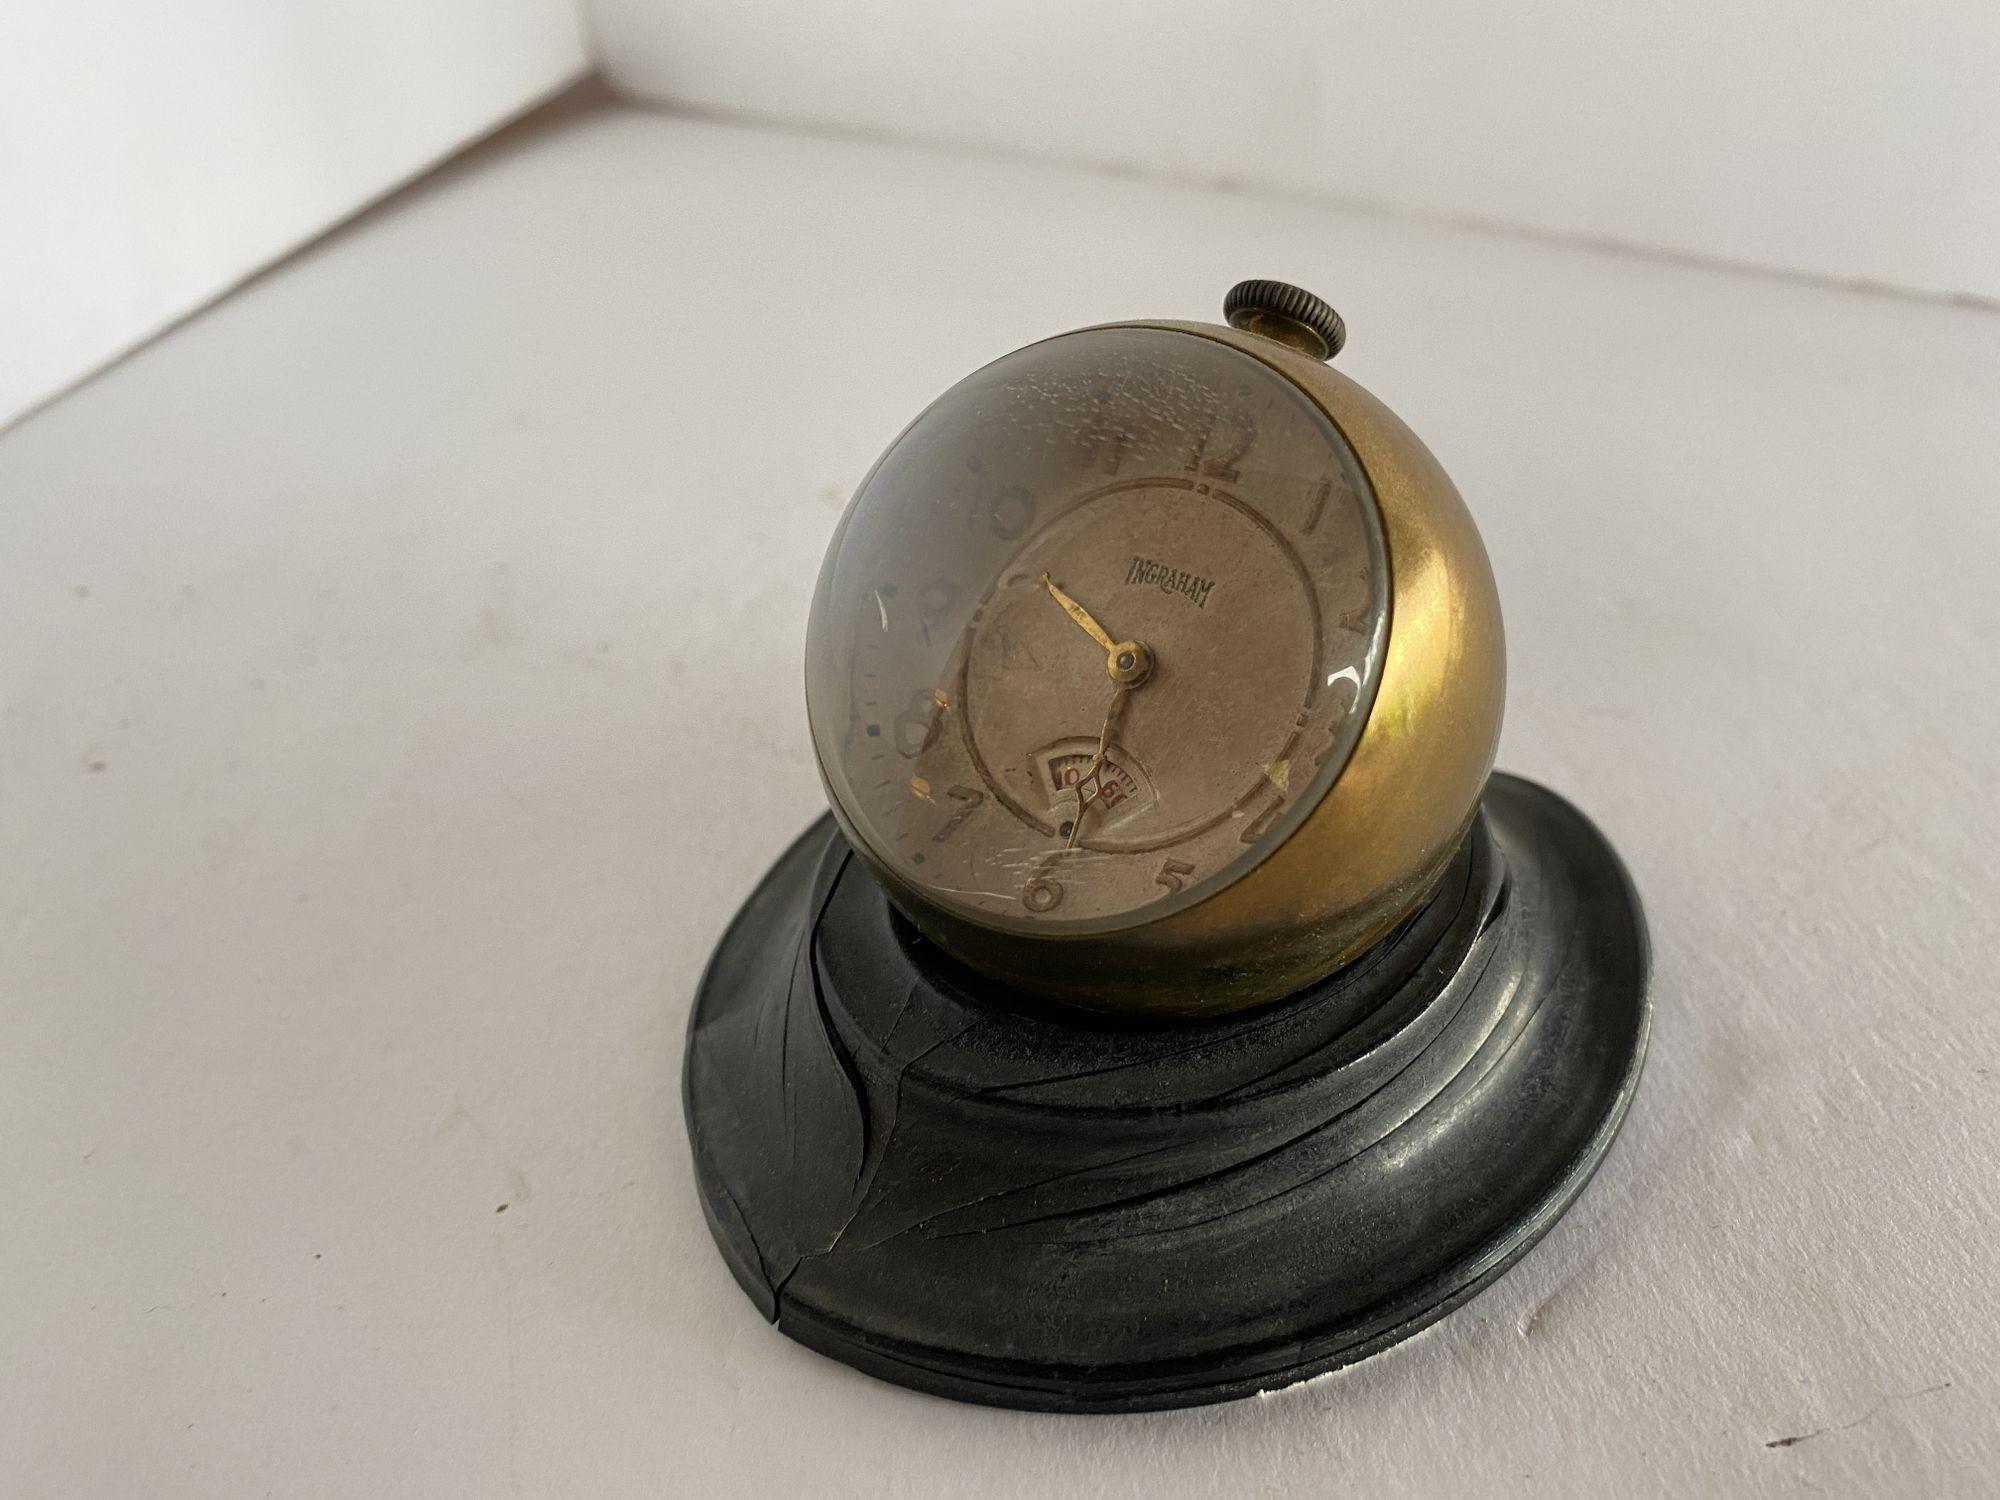 This is a little 30-hr. clock that has a face that magnifies the numbers. It has a second revolving unit. Mechanical pocket watch design ball clock, wind the winding knob for running the small clock. Pull up the winding knob gently for dialing the